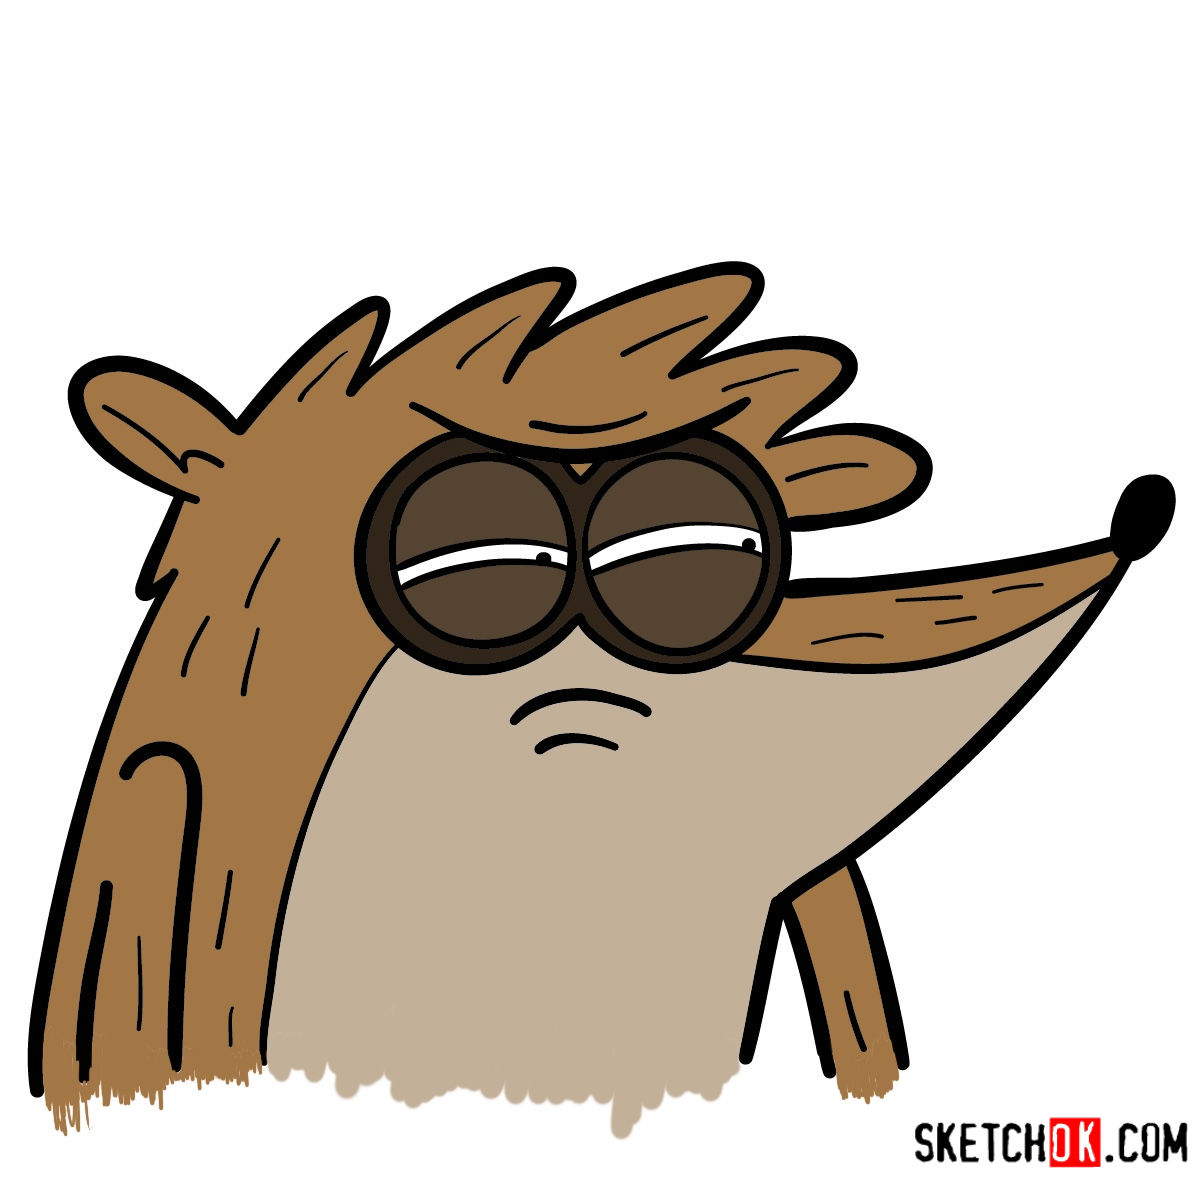 How to draw Rigby's face | Regular Show